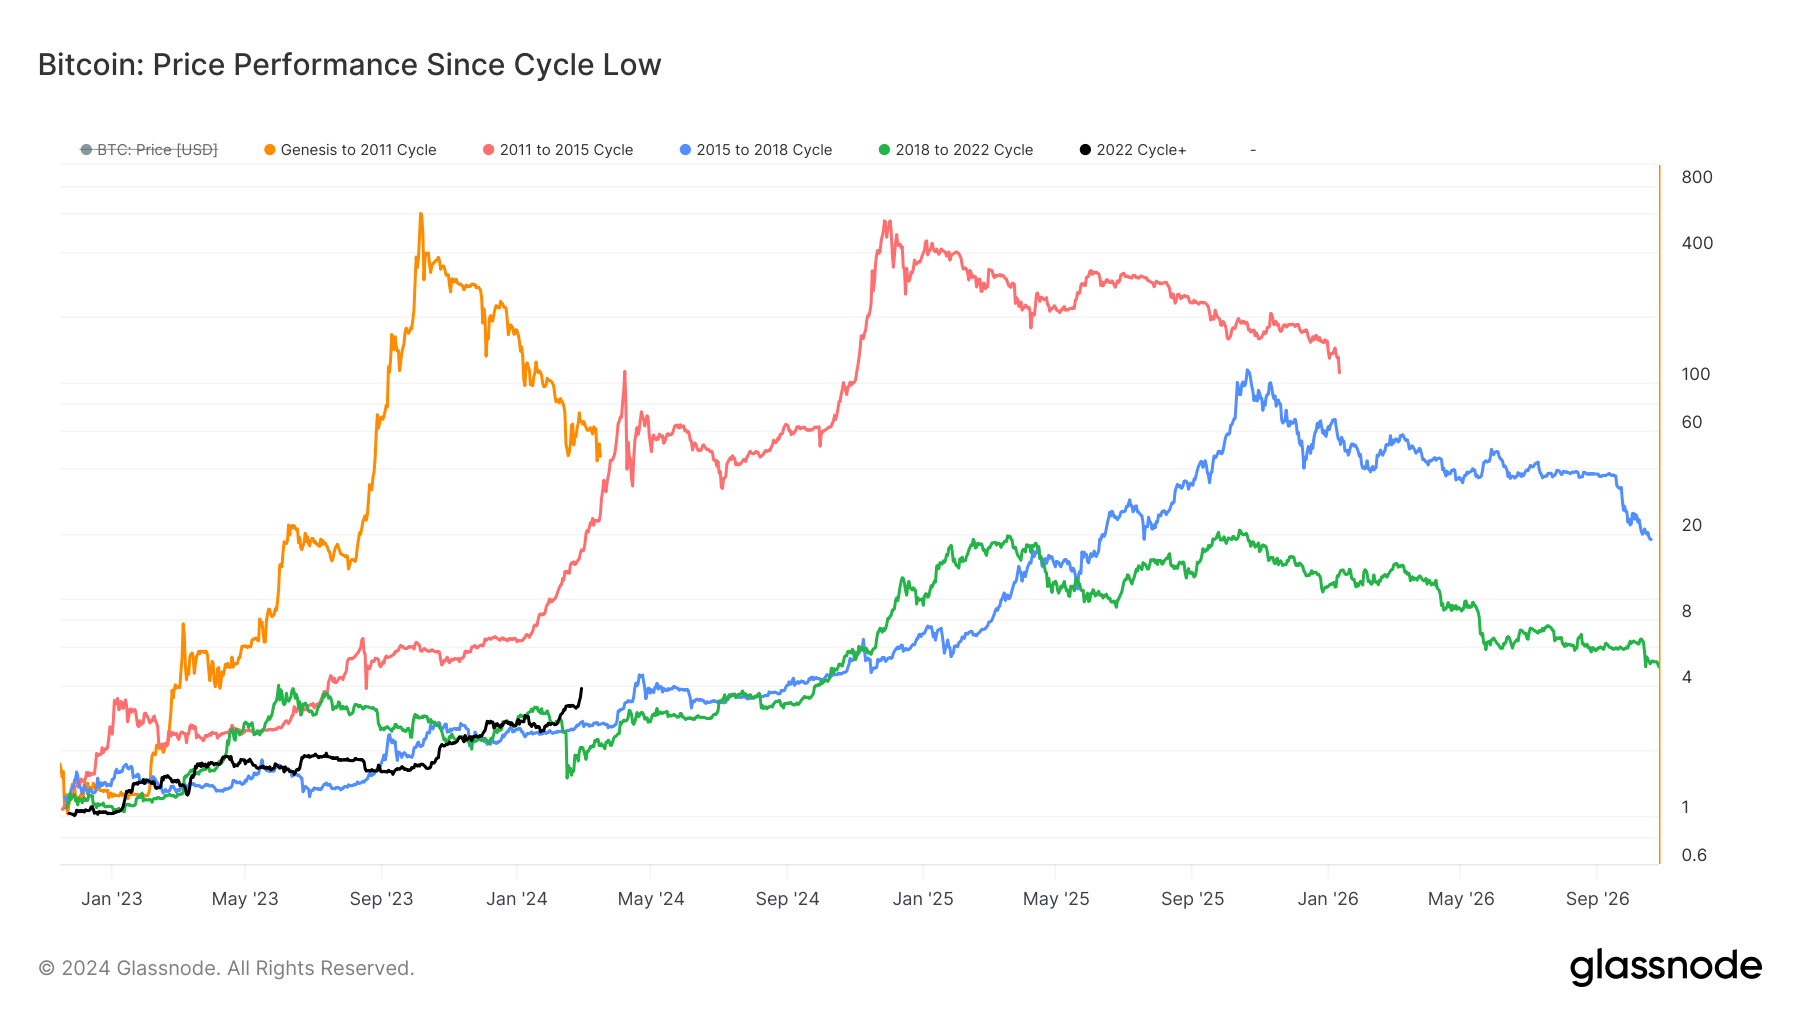 Price Performance since cycle low: (Source: Glassnode)